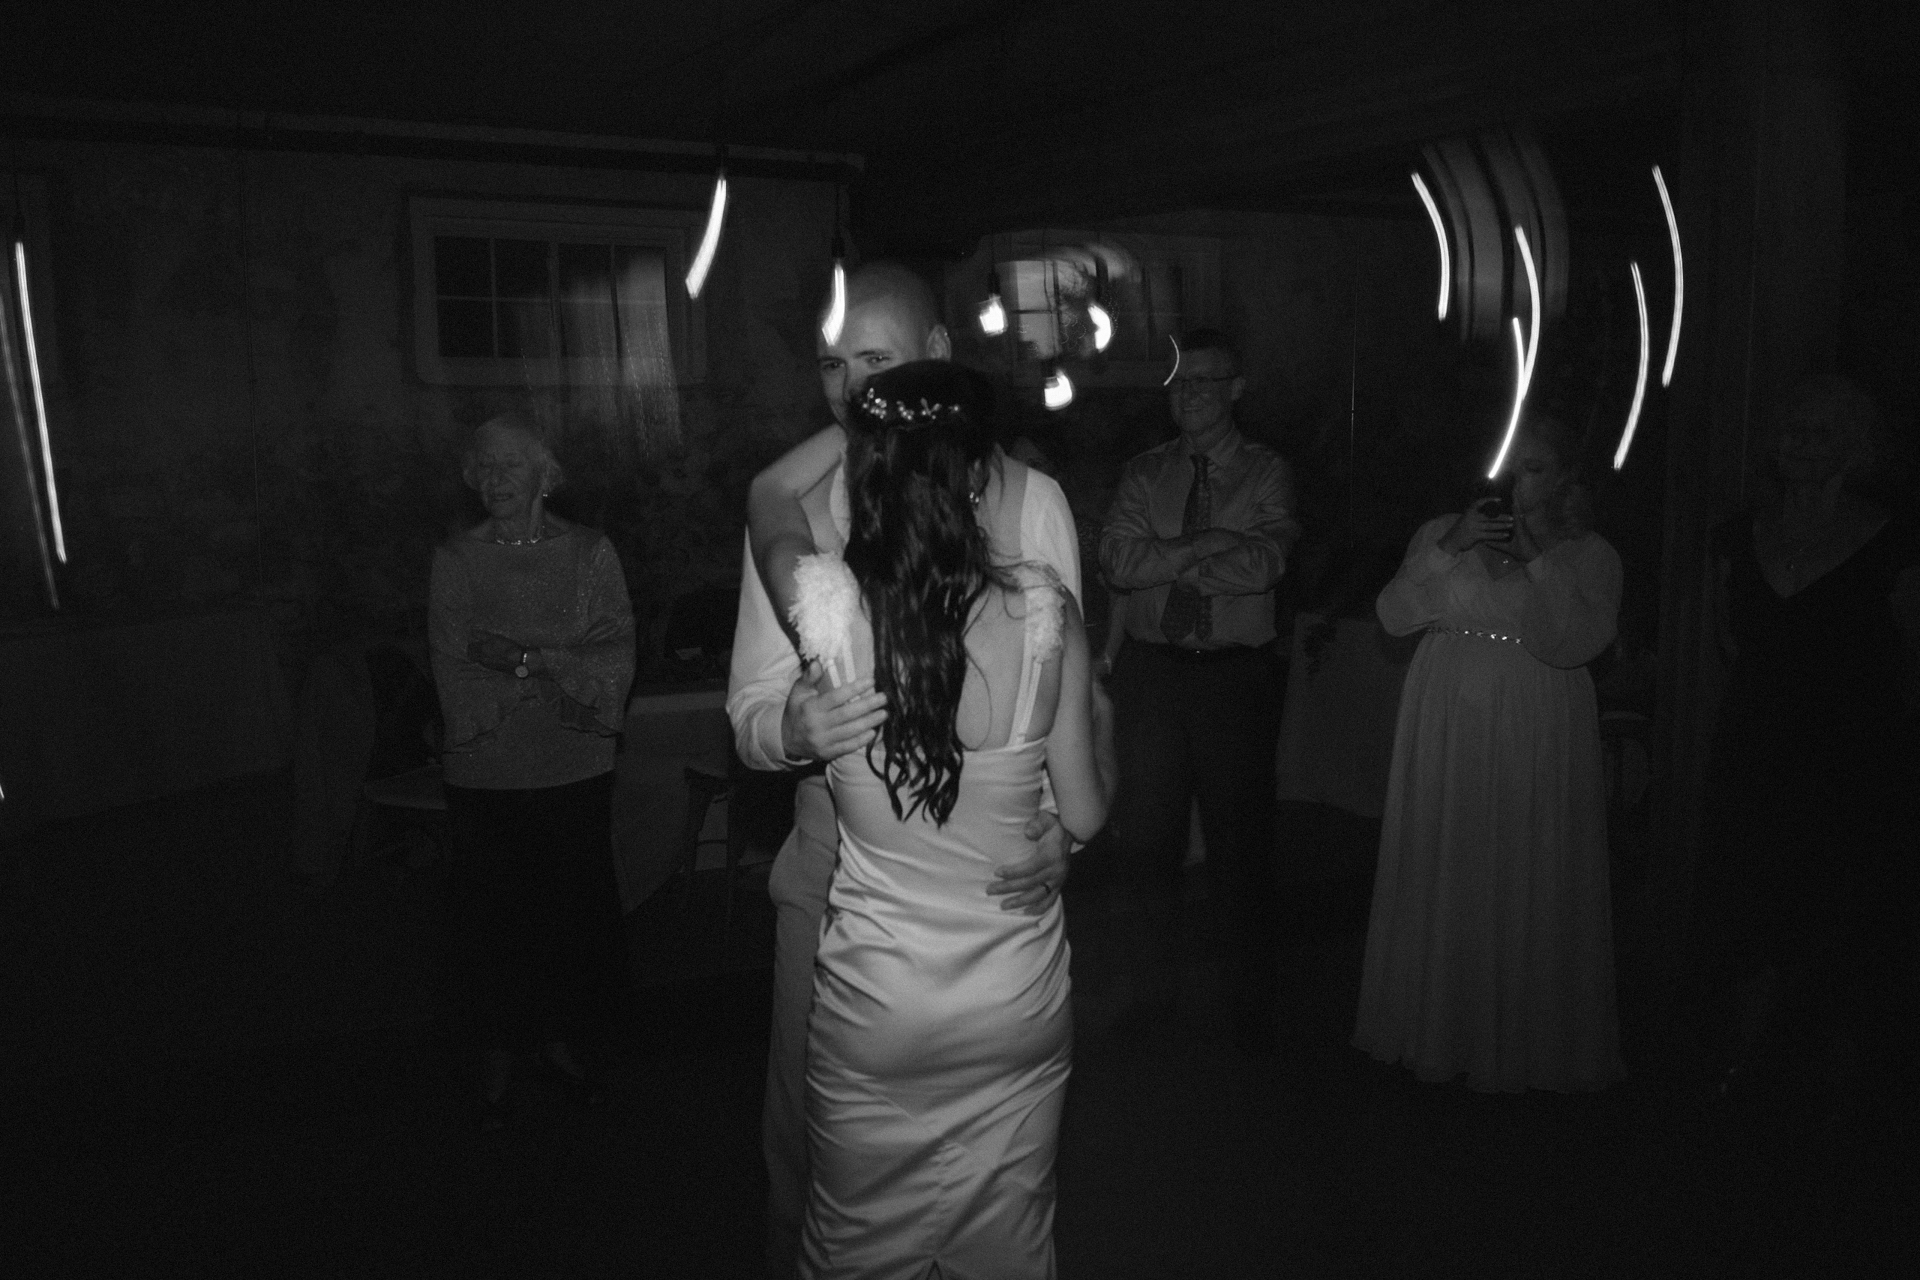 Bride and groom share a final dance, marking the end of their wedding day.